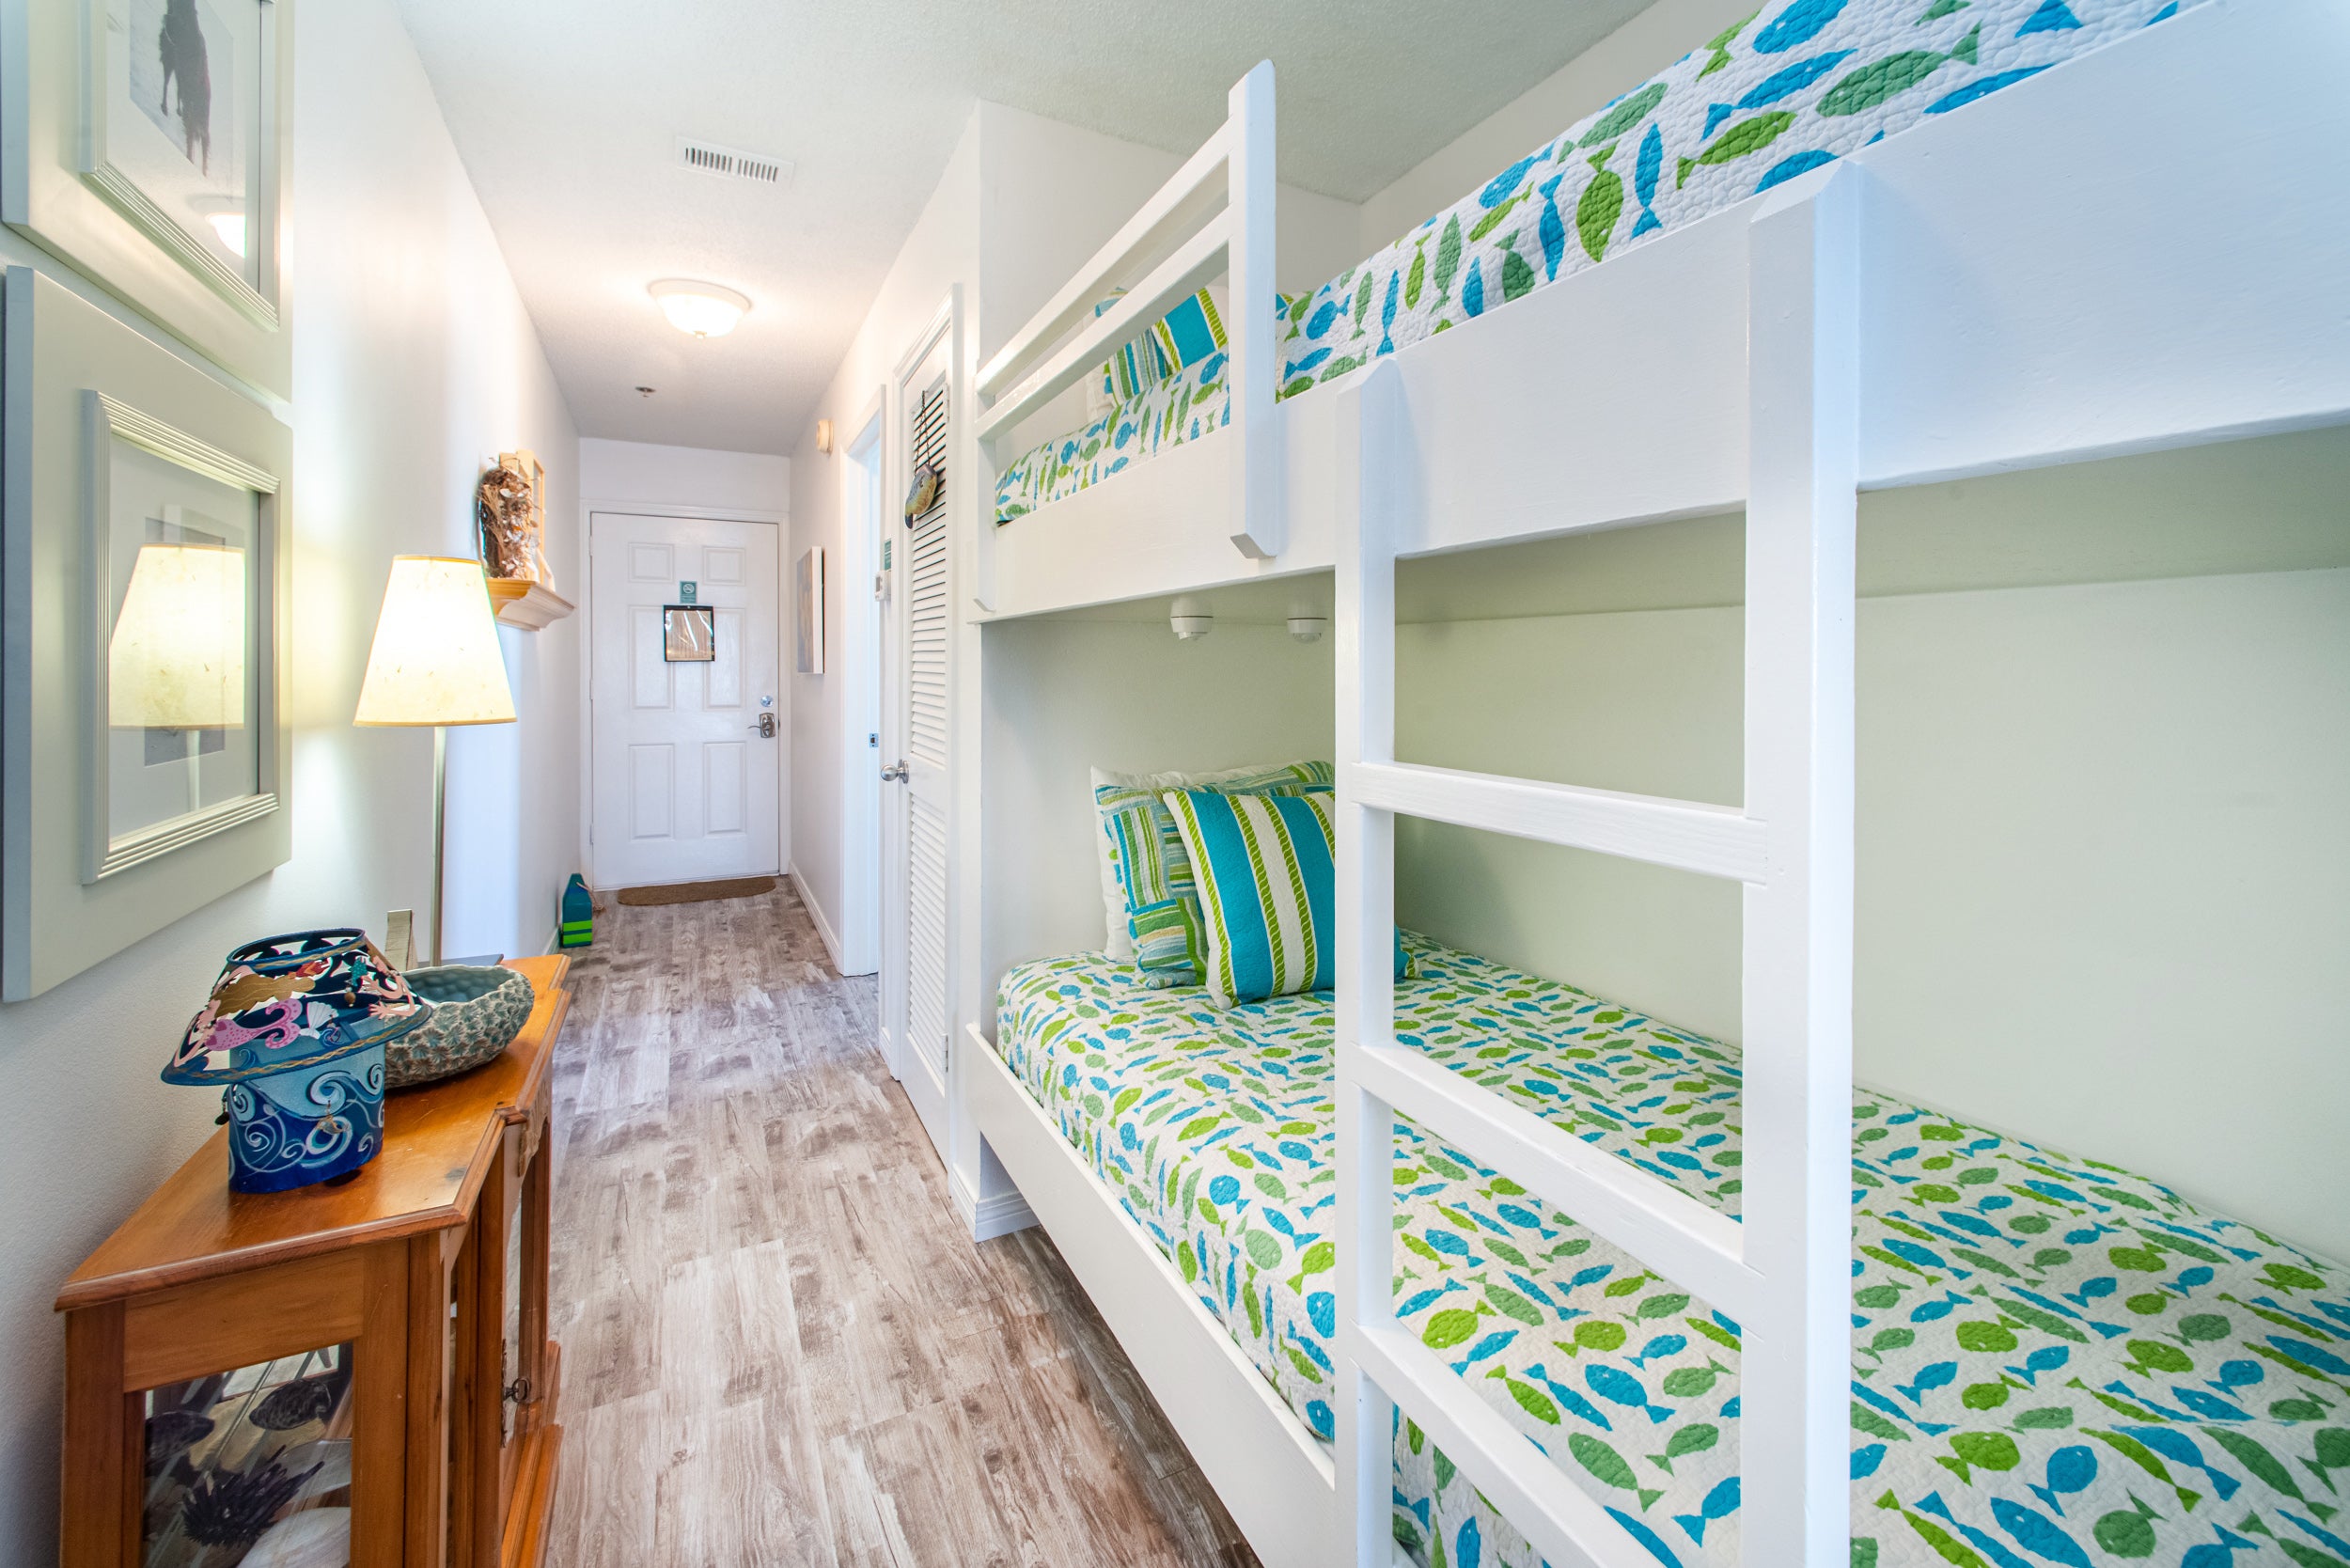 Bunk beds in the main hall